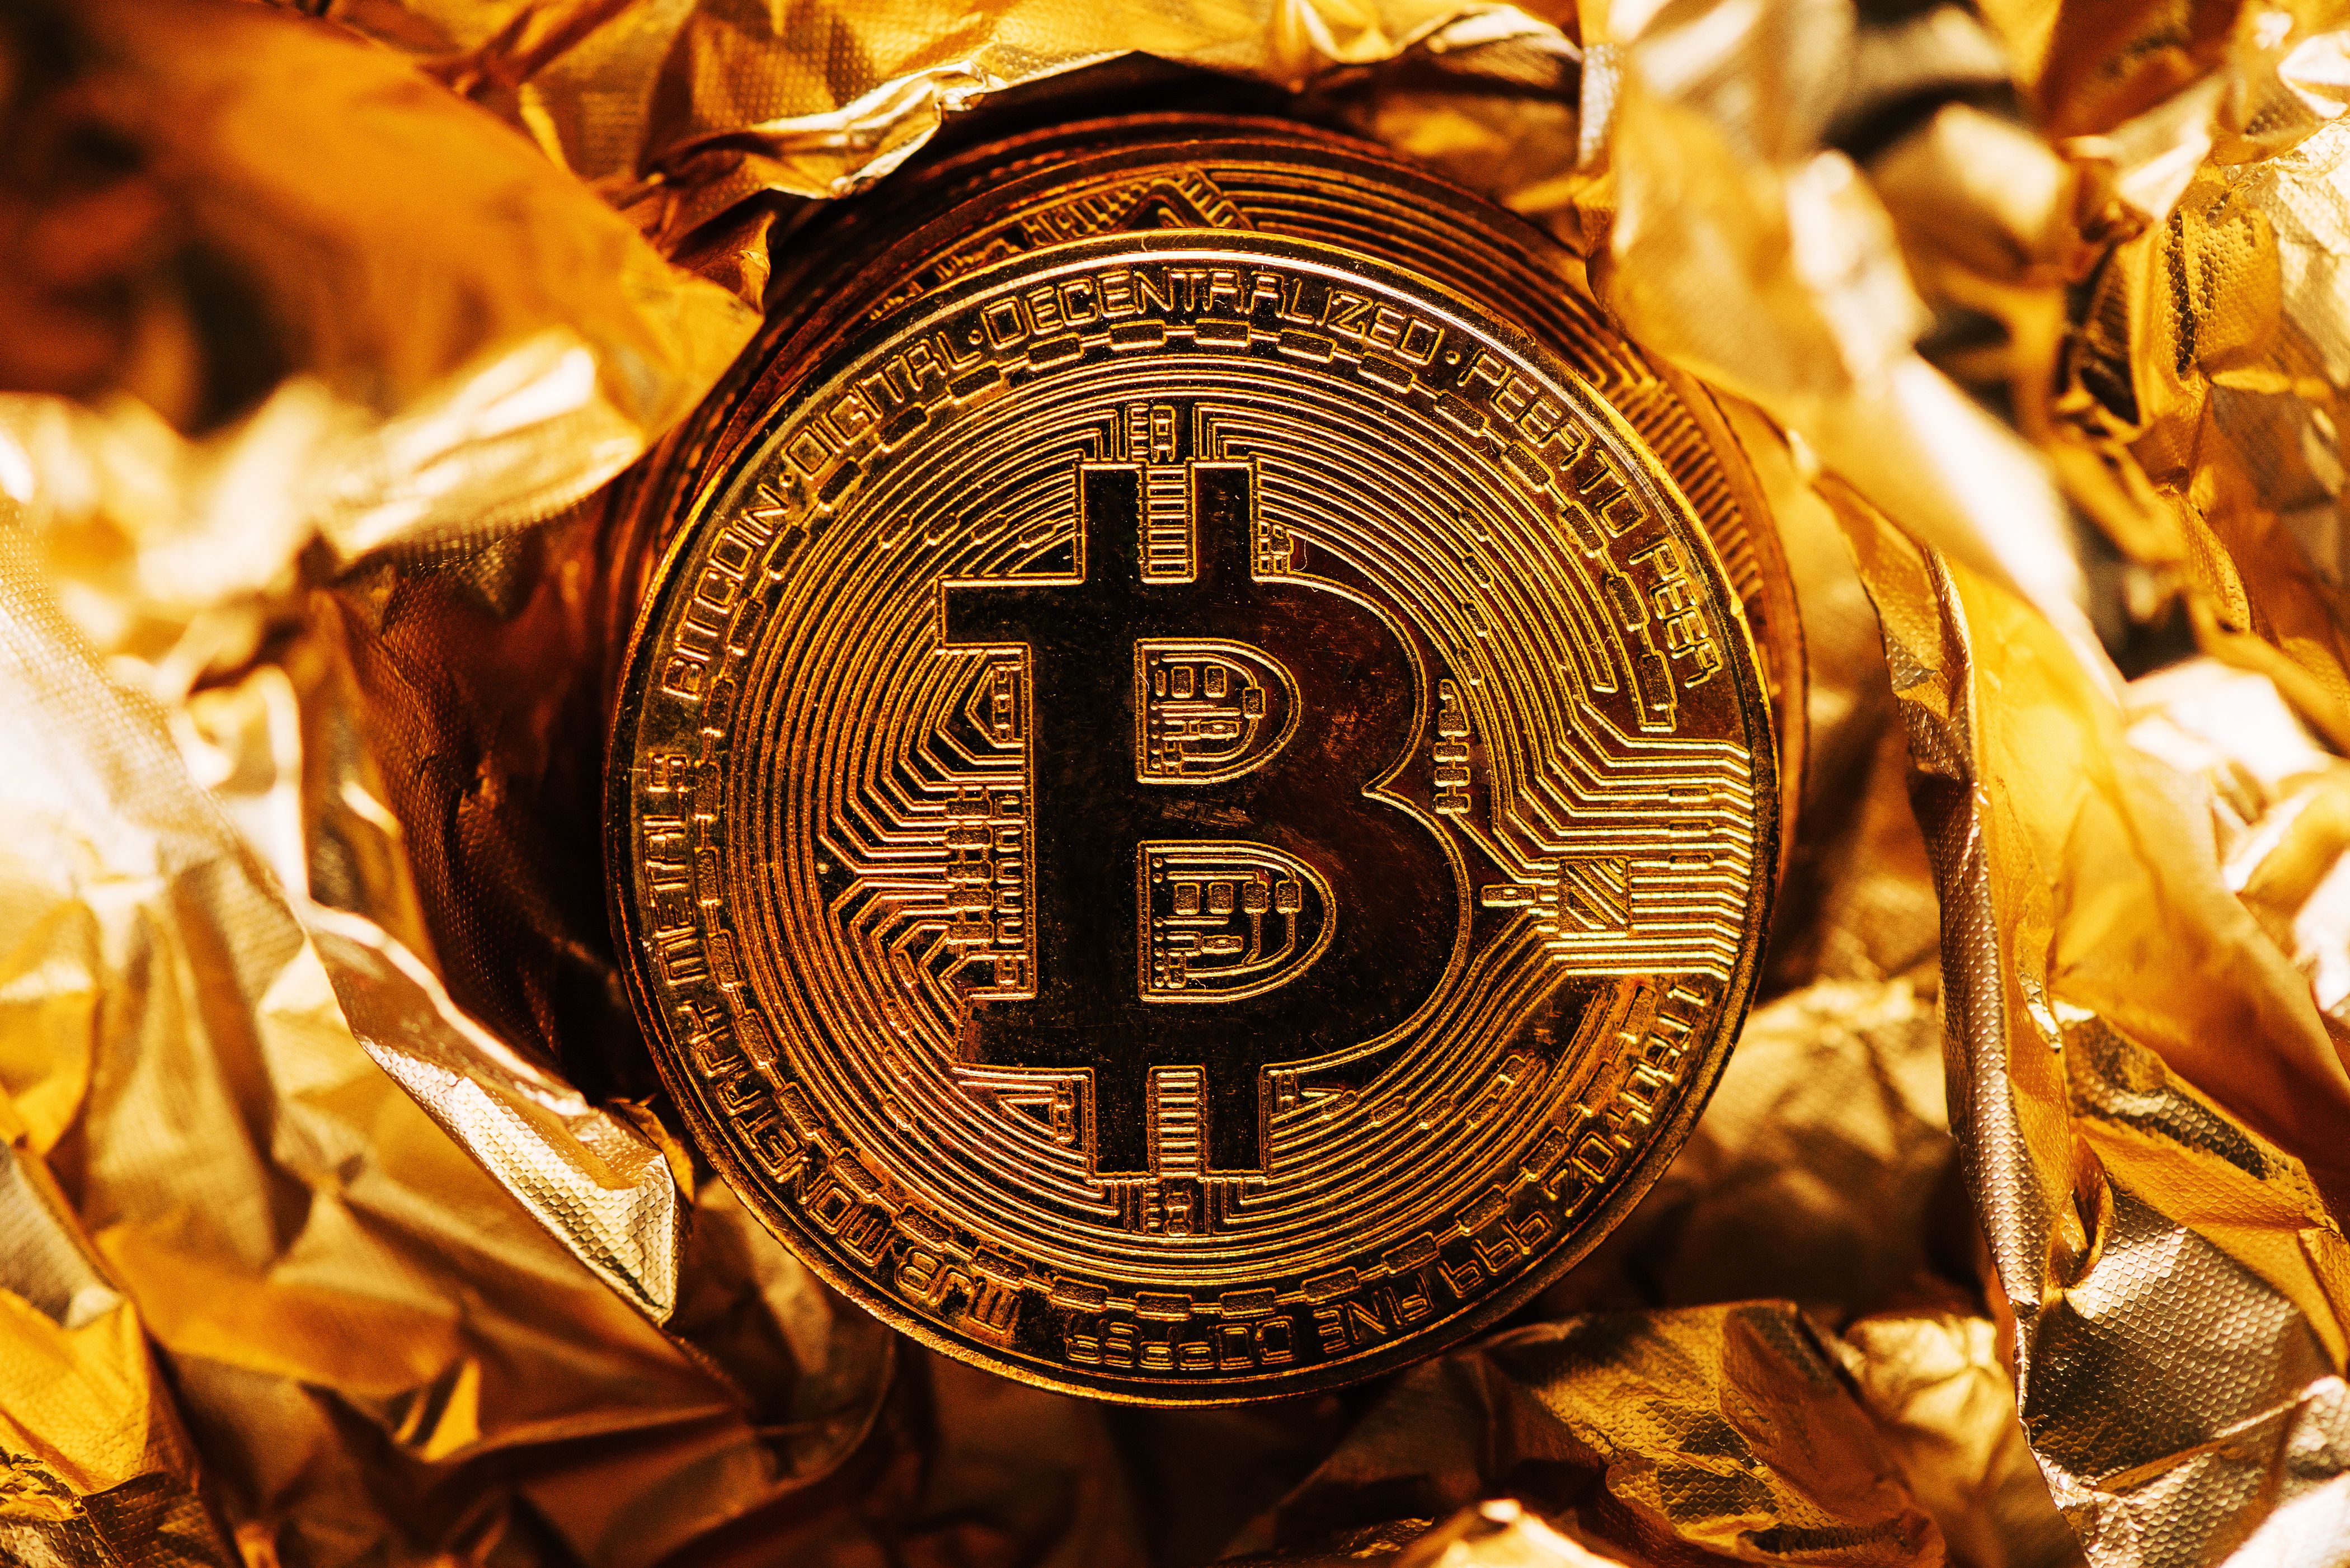 Bitcoin Gold Coin on Foil wallpaper and image, picture, photo